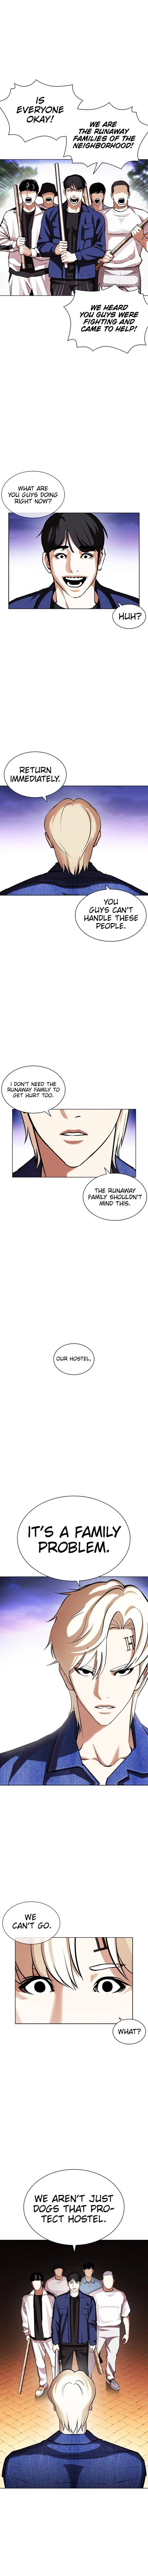 Lookism Chapter 401 page 4 - MangaWeebs.in